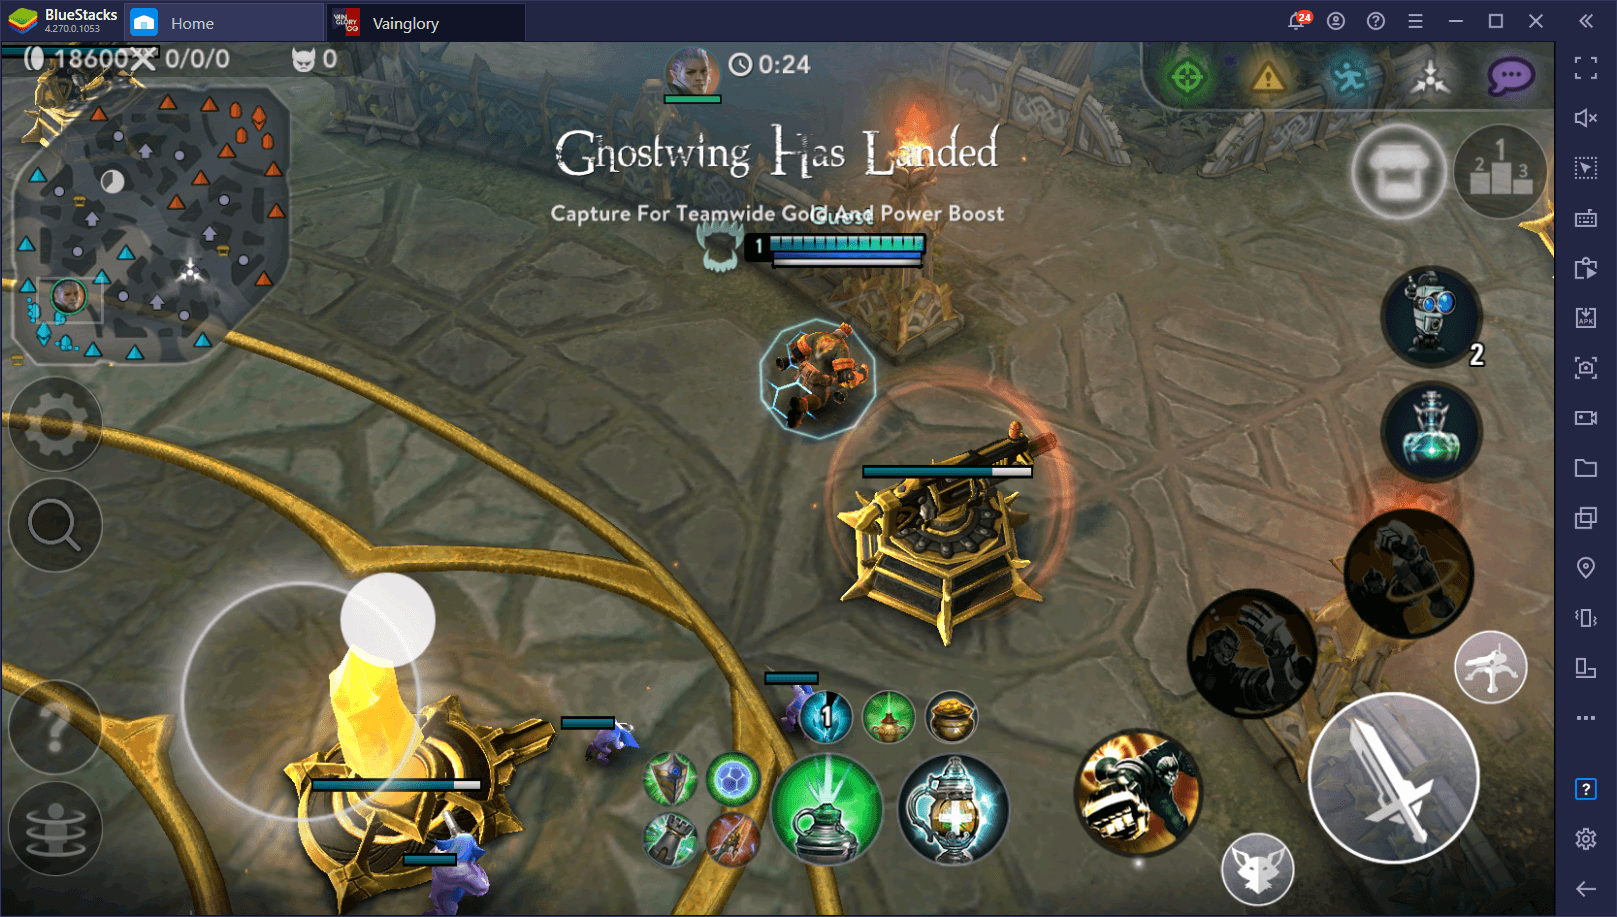 Vainglory - How to Use BlueStacks Features to Outplay Your Opponents